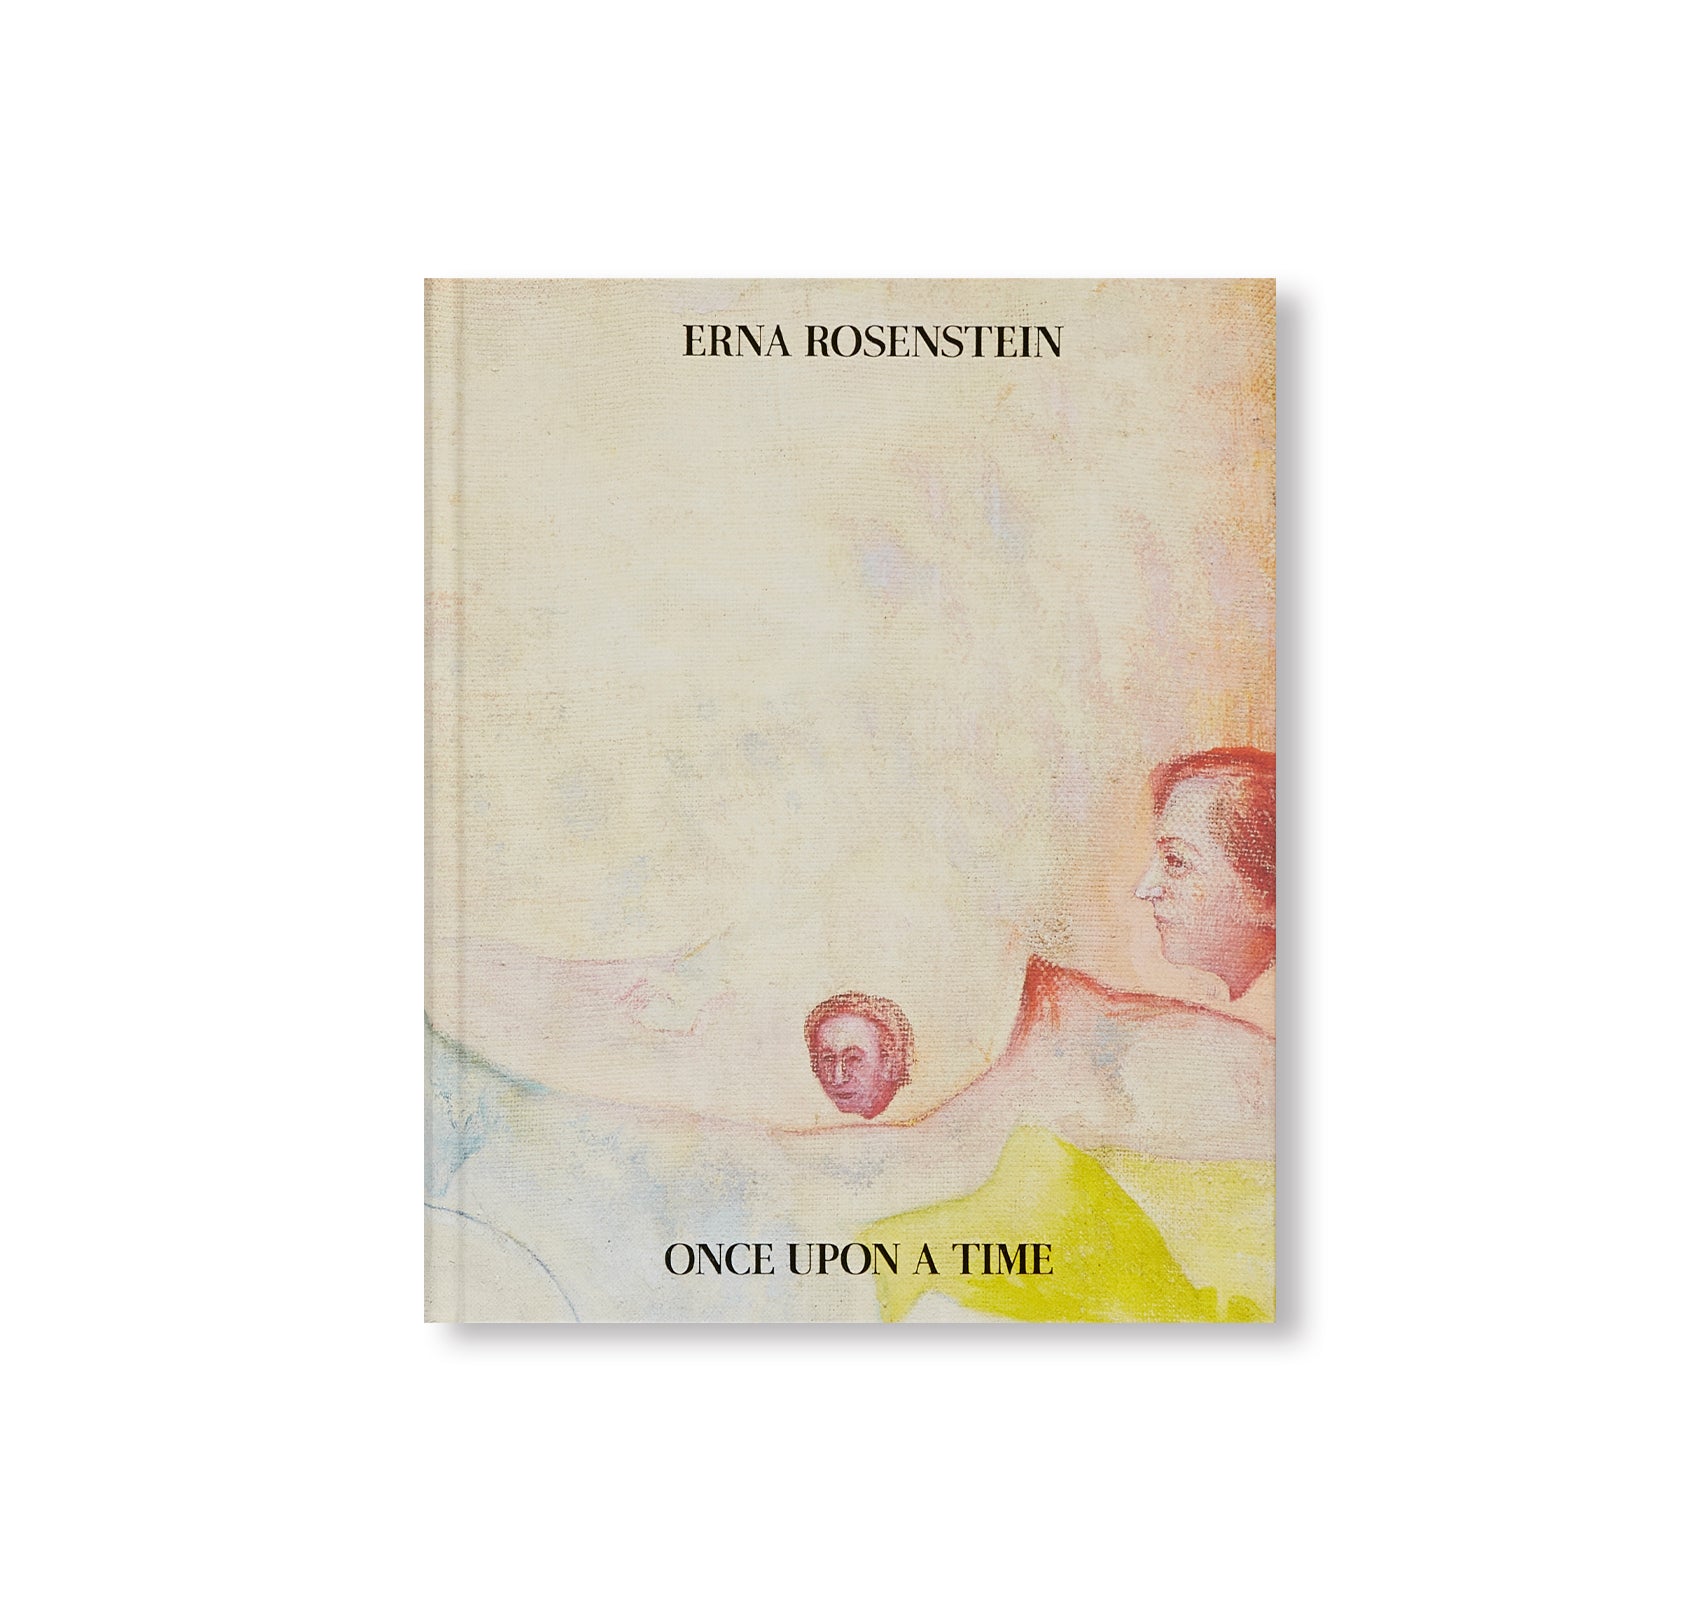 ONCE UPON A TIME by Erna Rosenstein